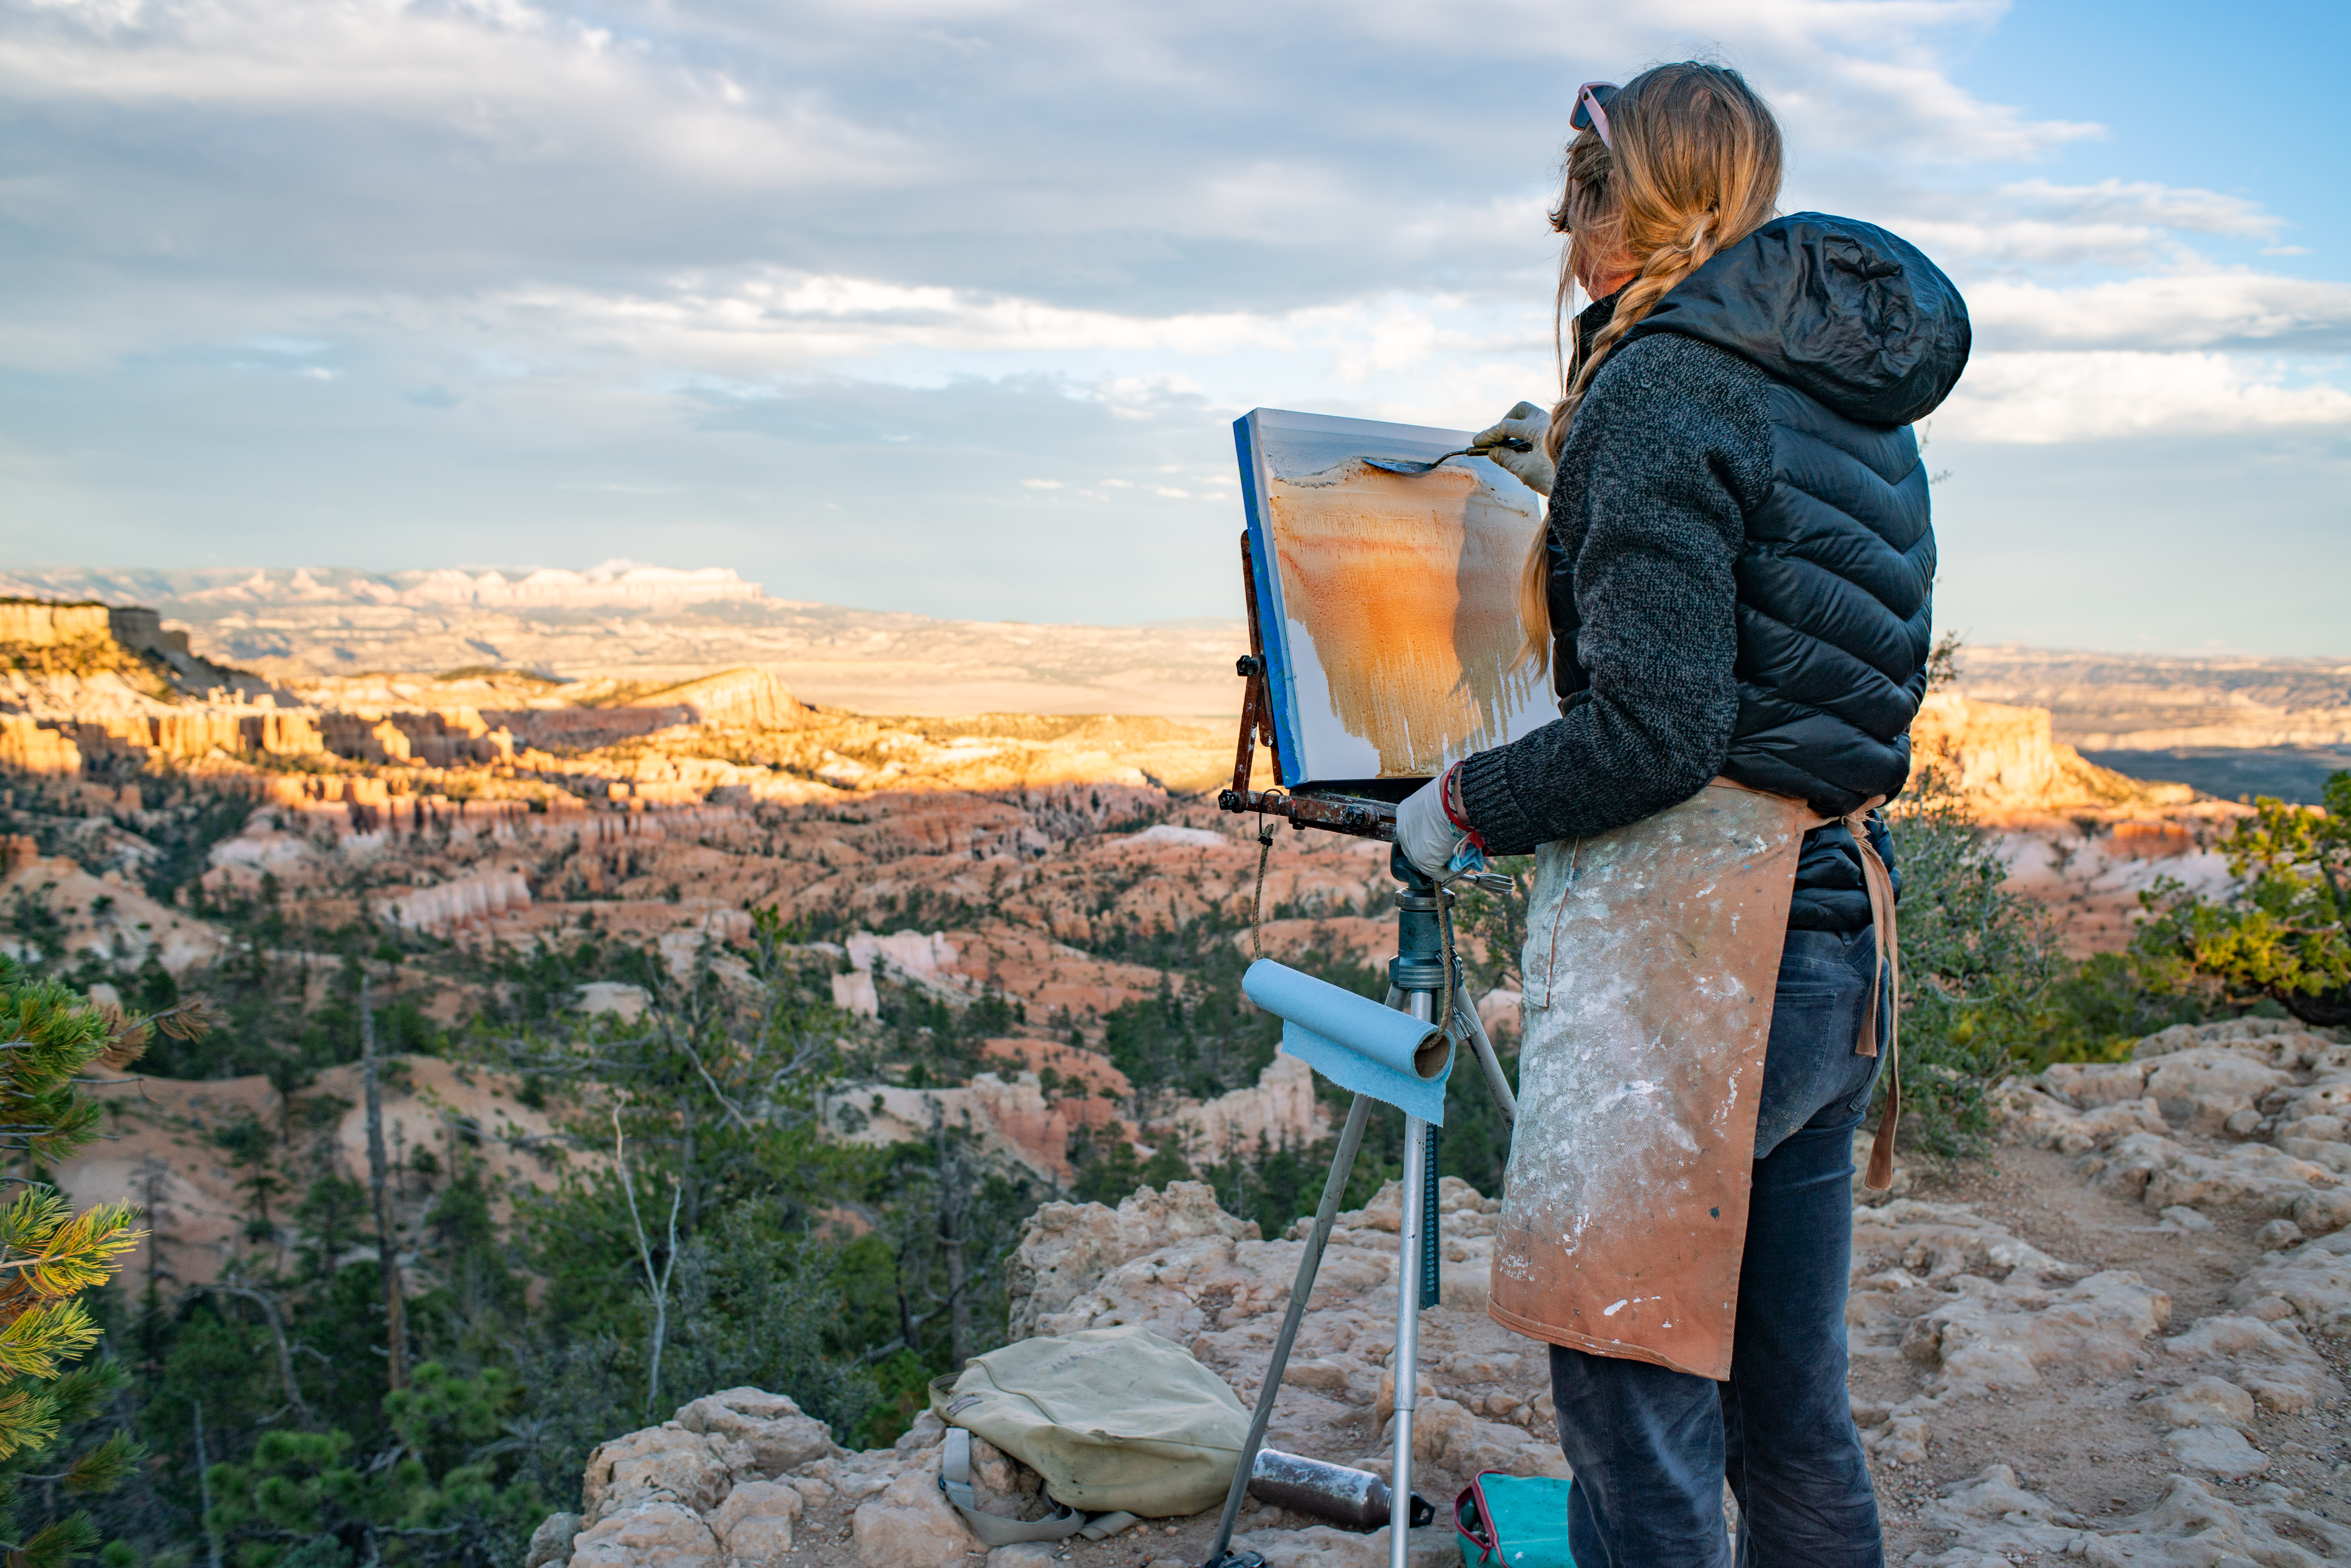 An artist stands at an easel painting a red rock landscape